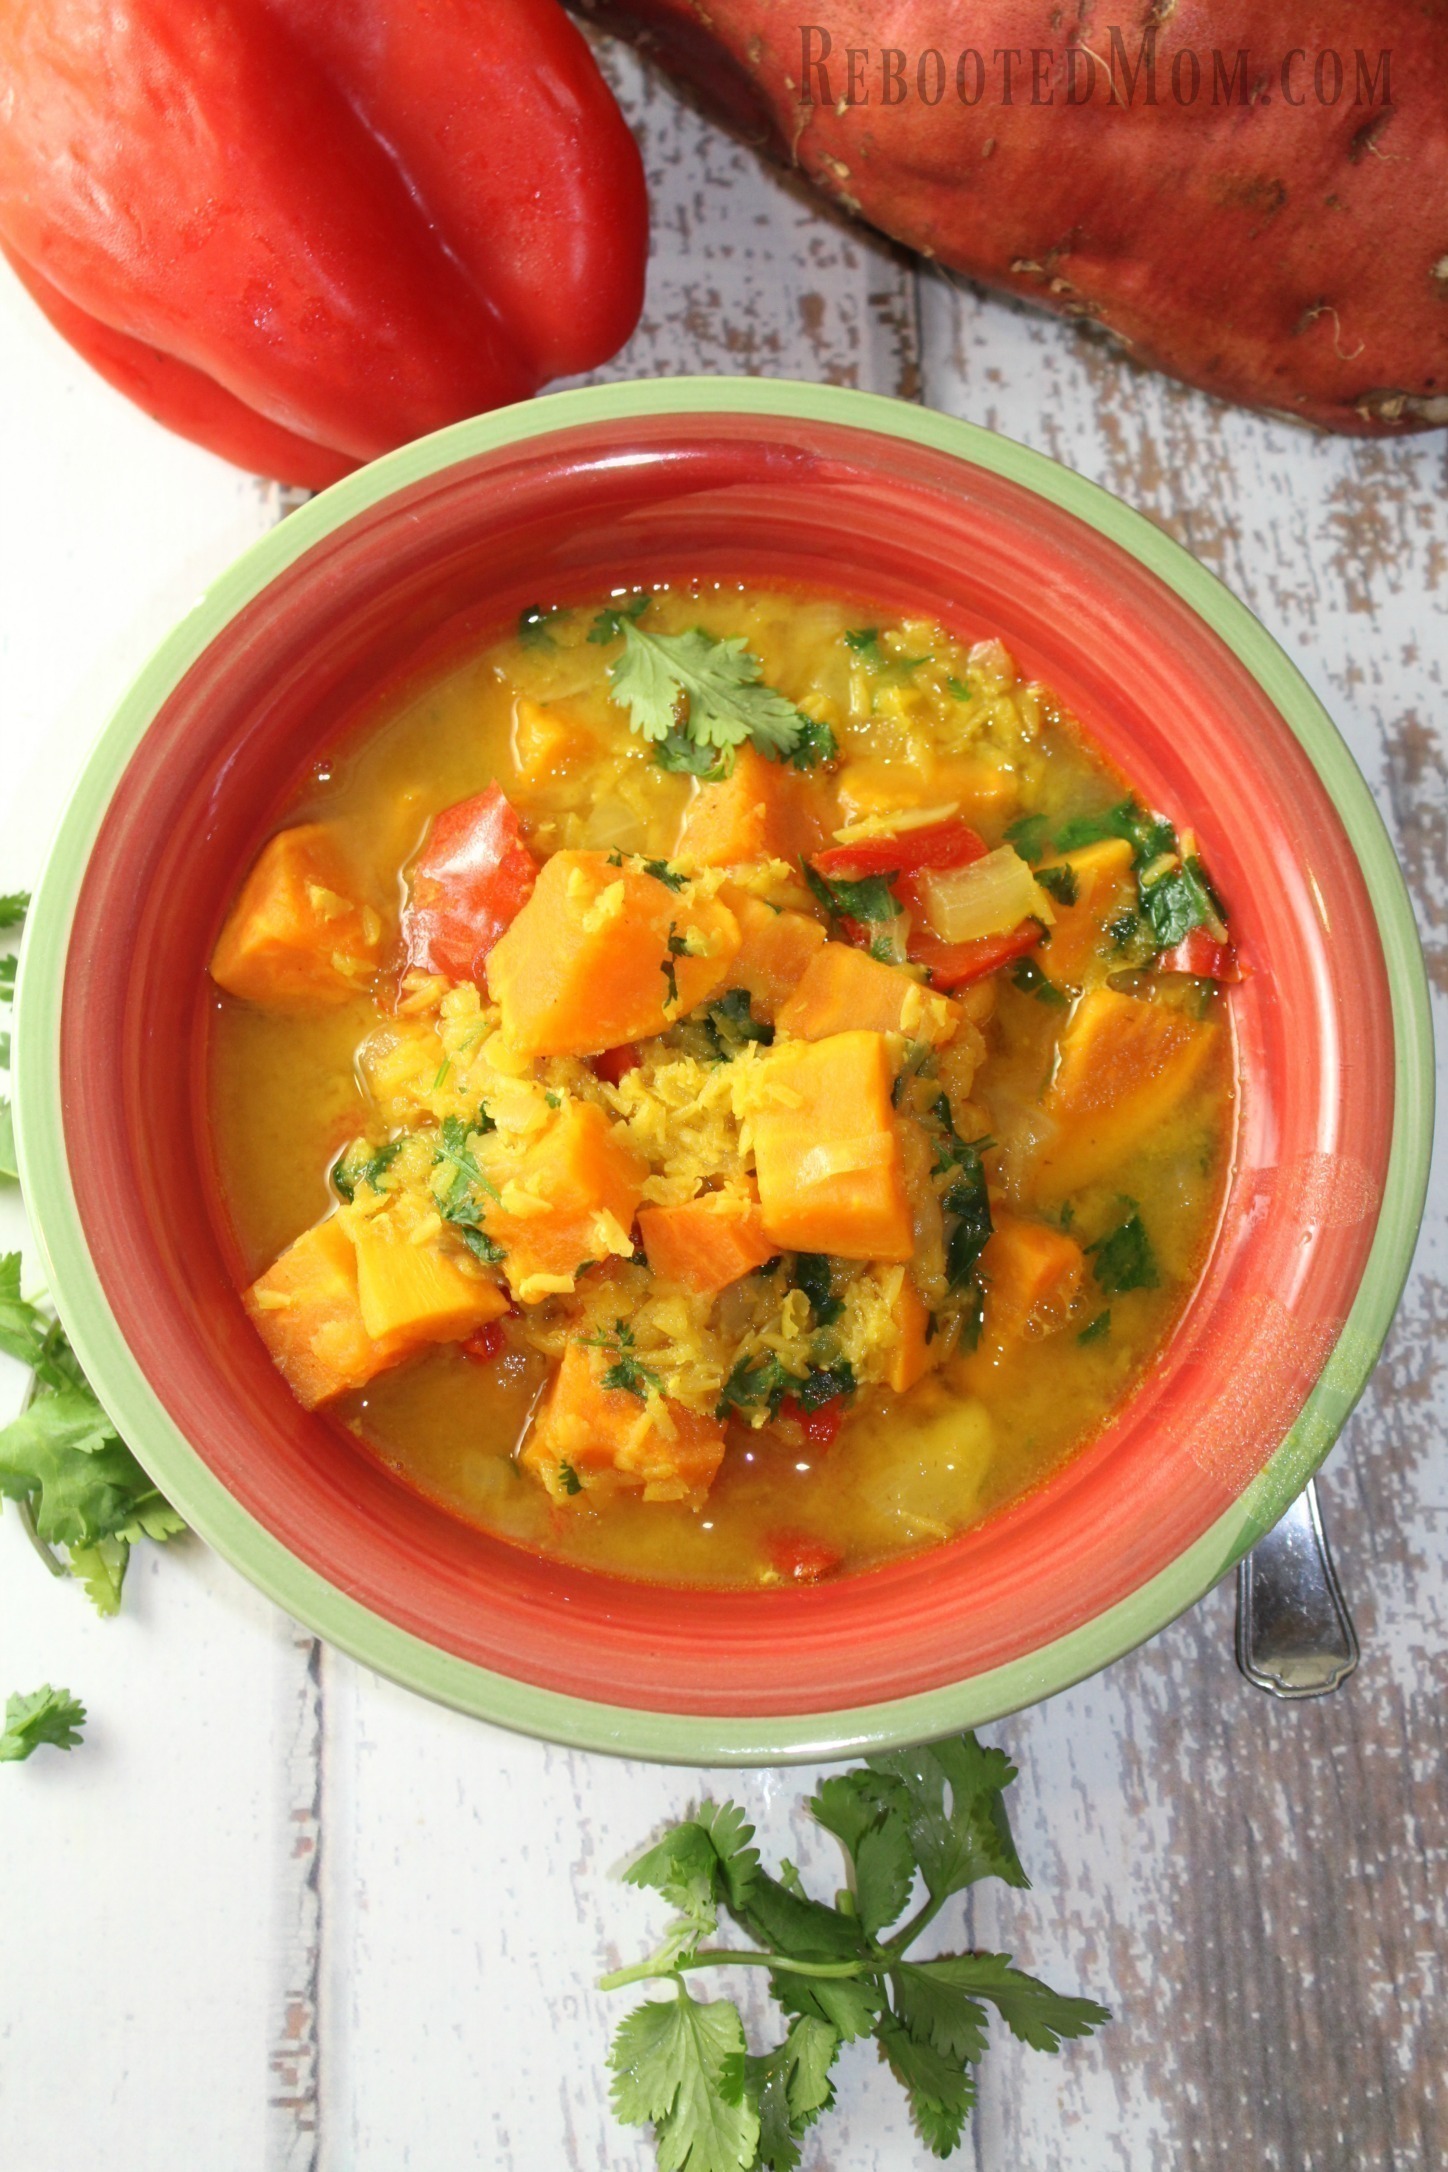 This Red Lentil & Sweet Potato Stew is not only meatless, it is chock full of flavor, protein and fiber.